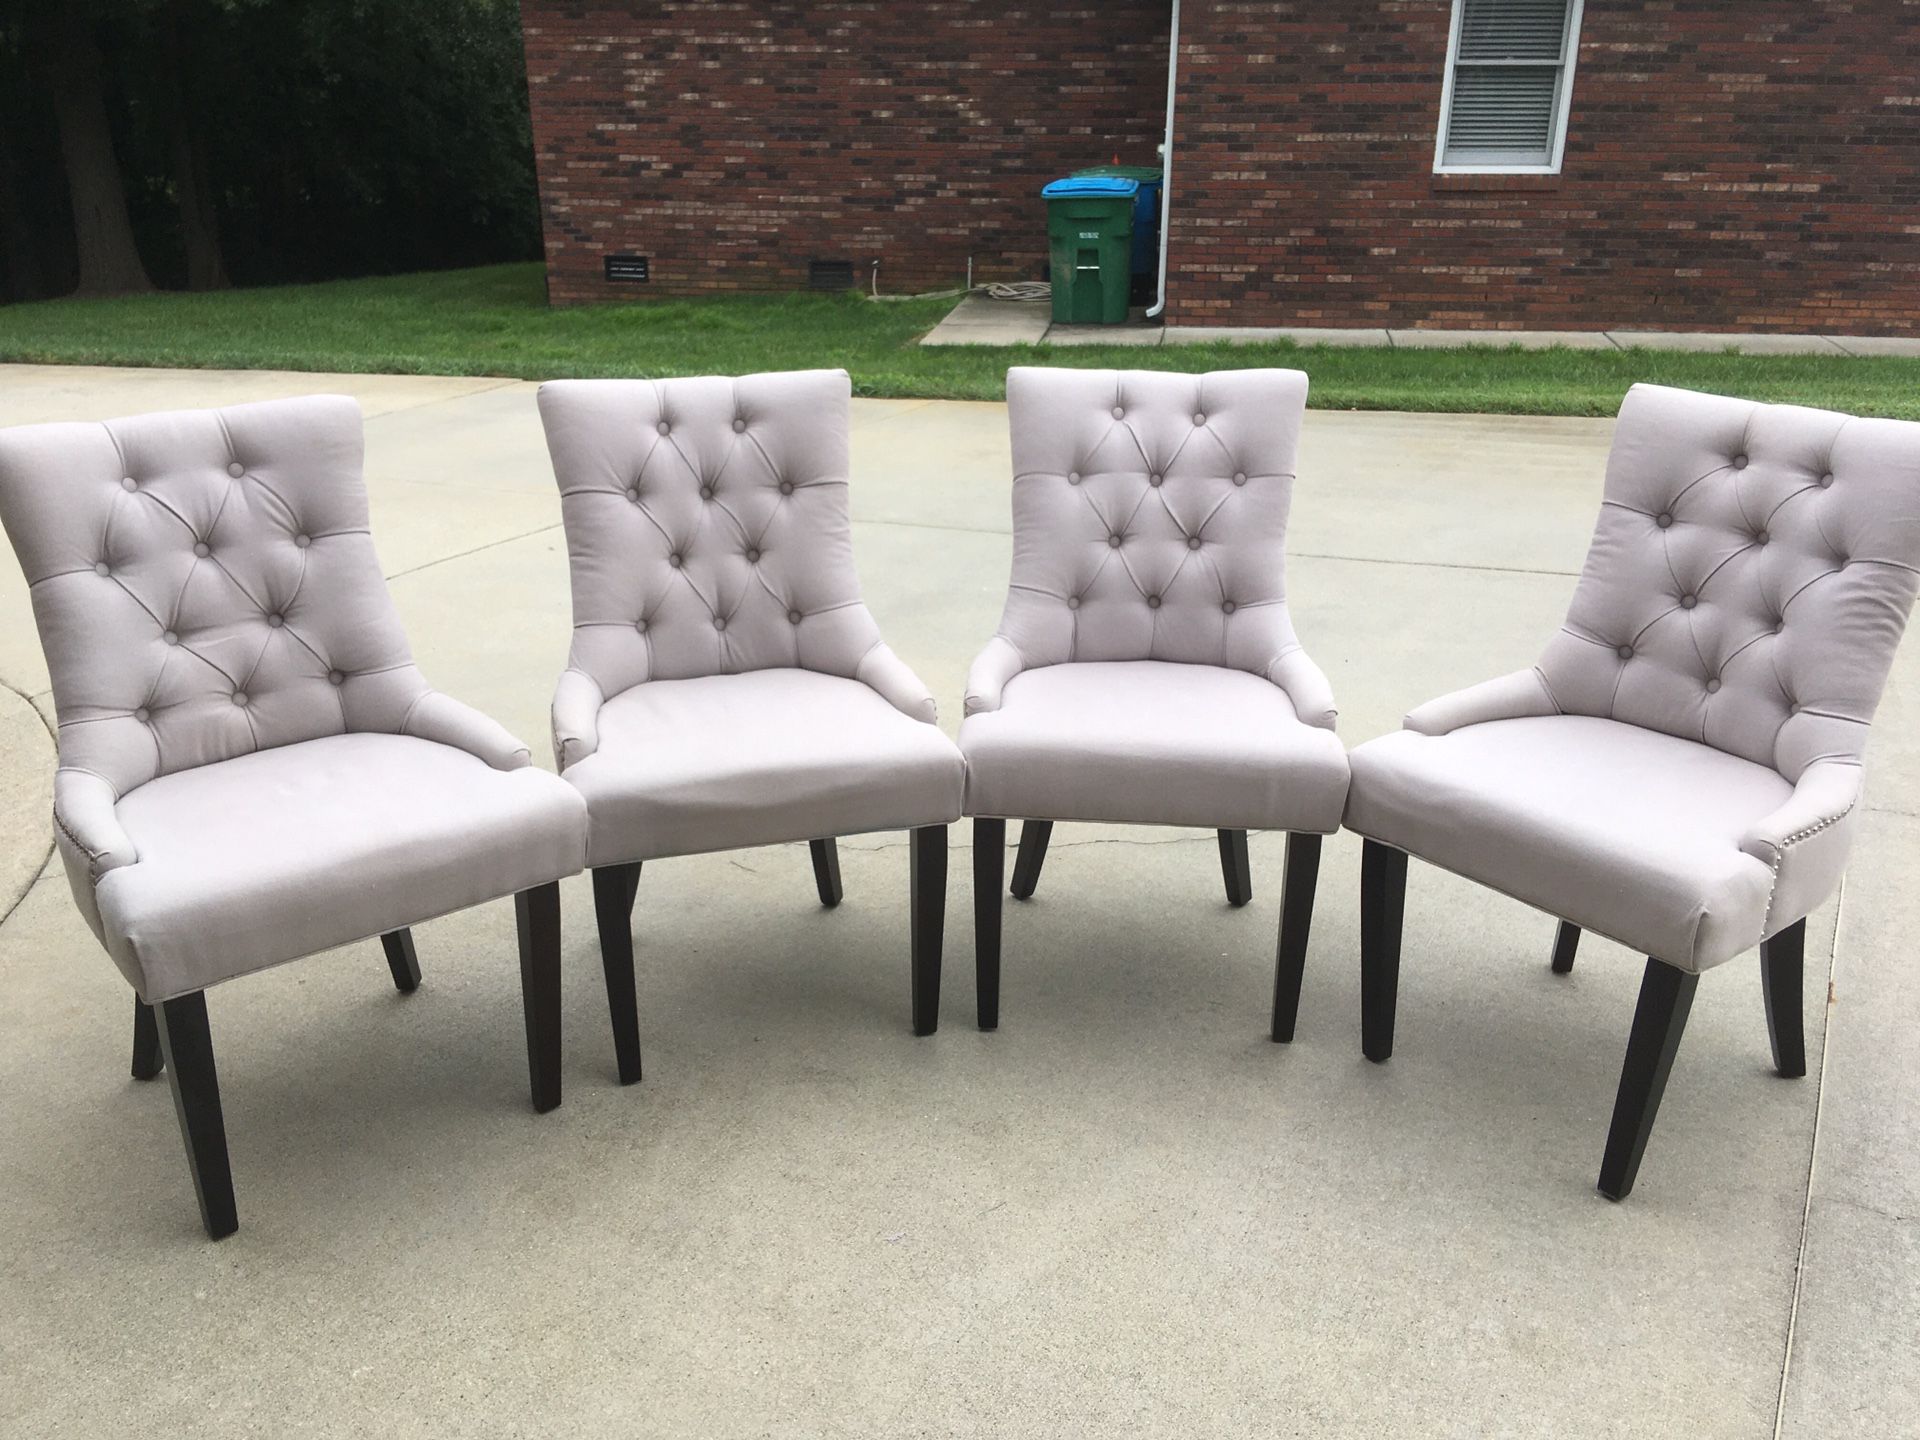 Selling four gray chairs with nail heads